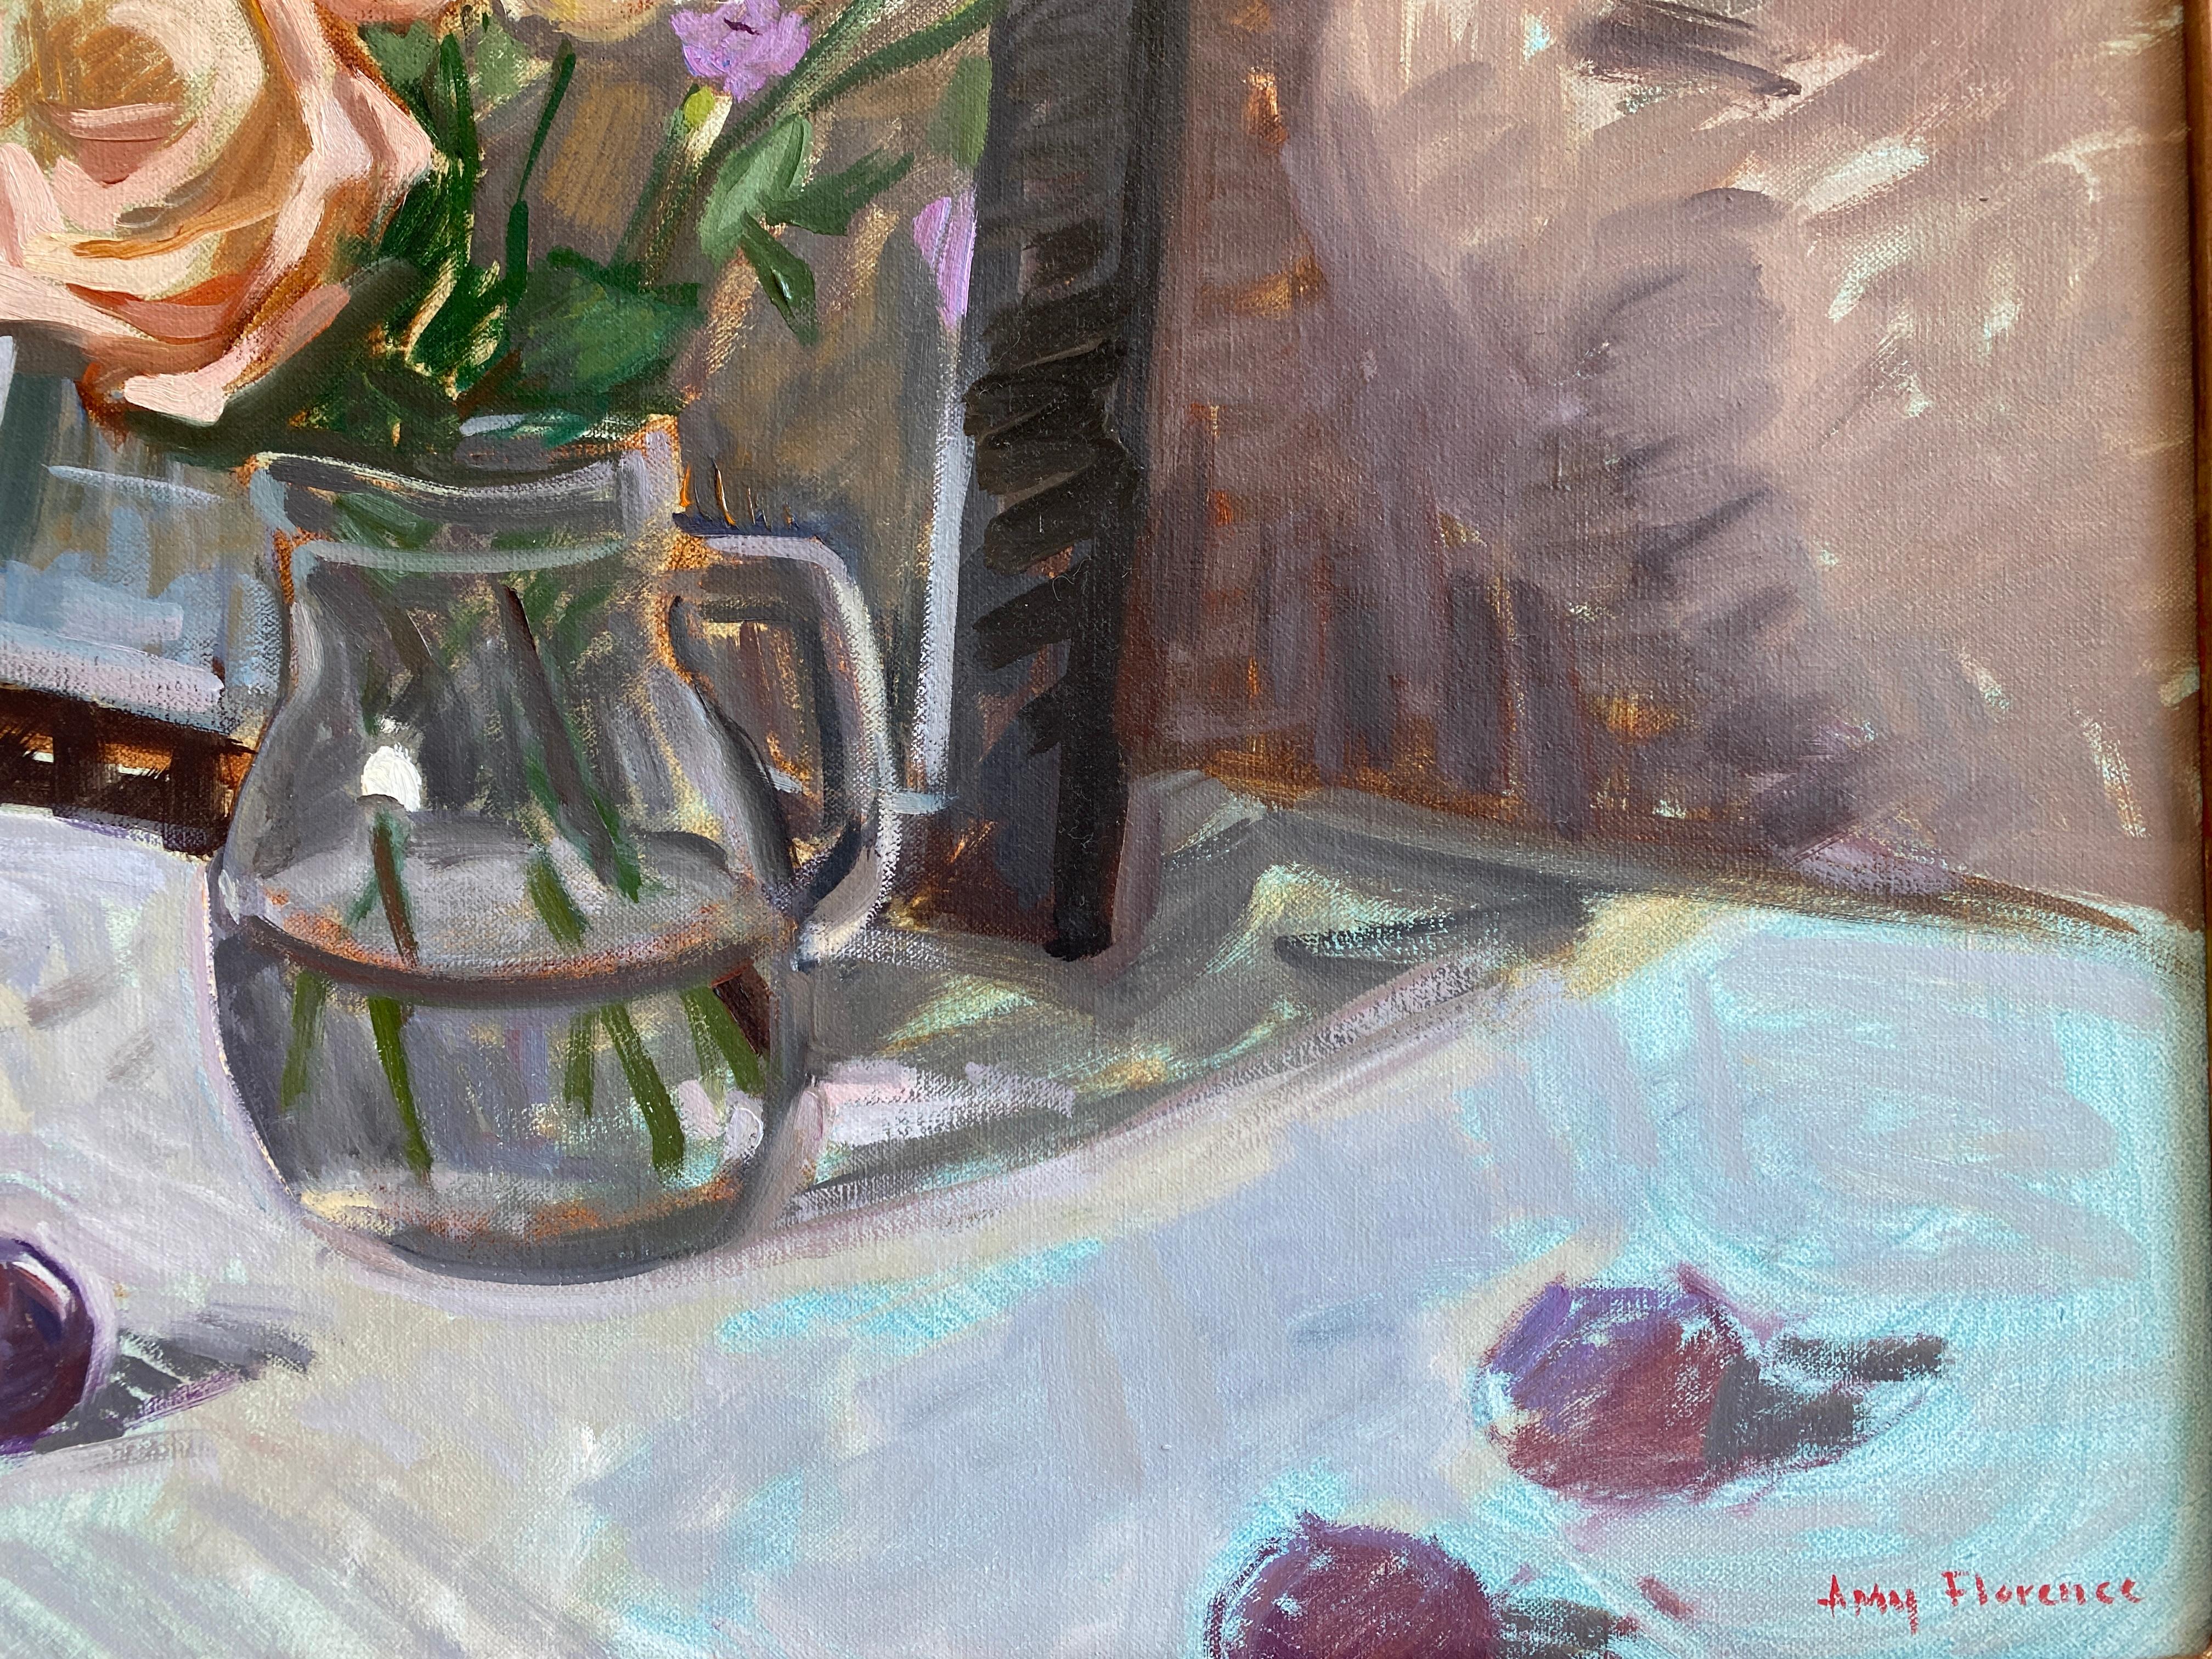 A classic Amy Florence still life with broad impressionist strokes creating an inviting space that makes you want to enter into her world.

Framed Dimensions: 33.6 x 41.4 inches

Artist Bio:
Amy Florence is a London born artist working out of her